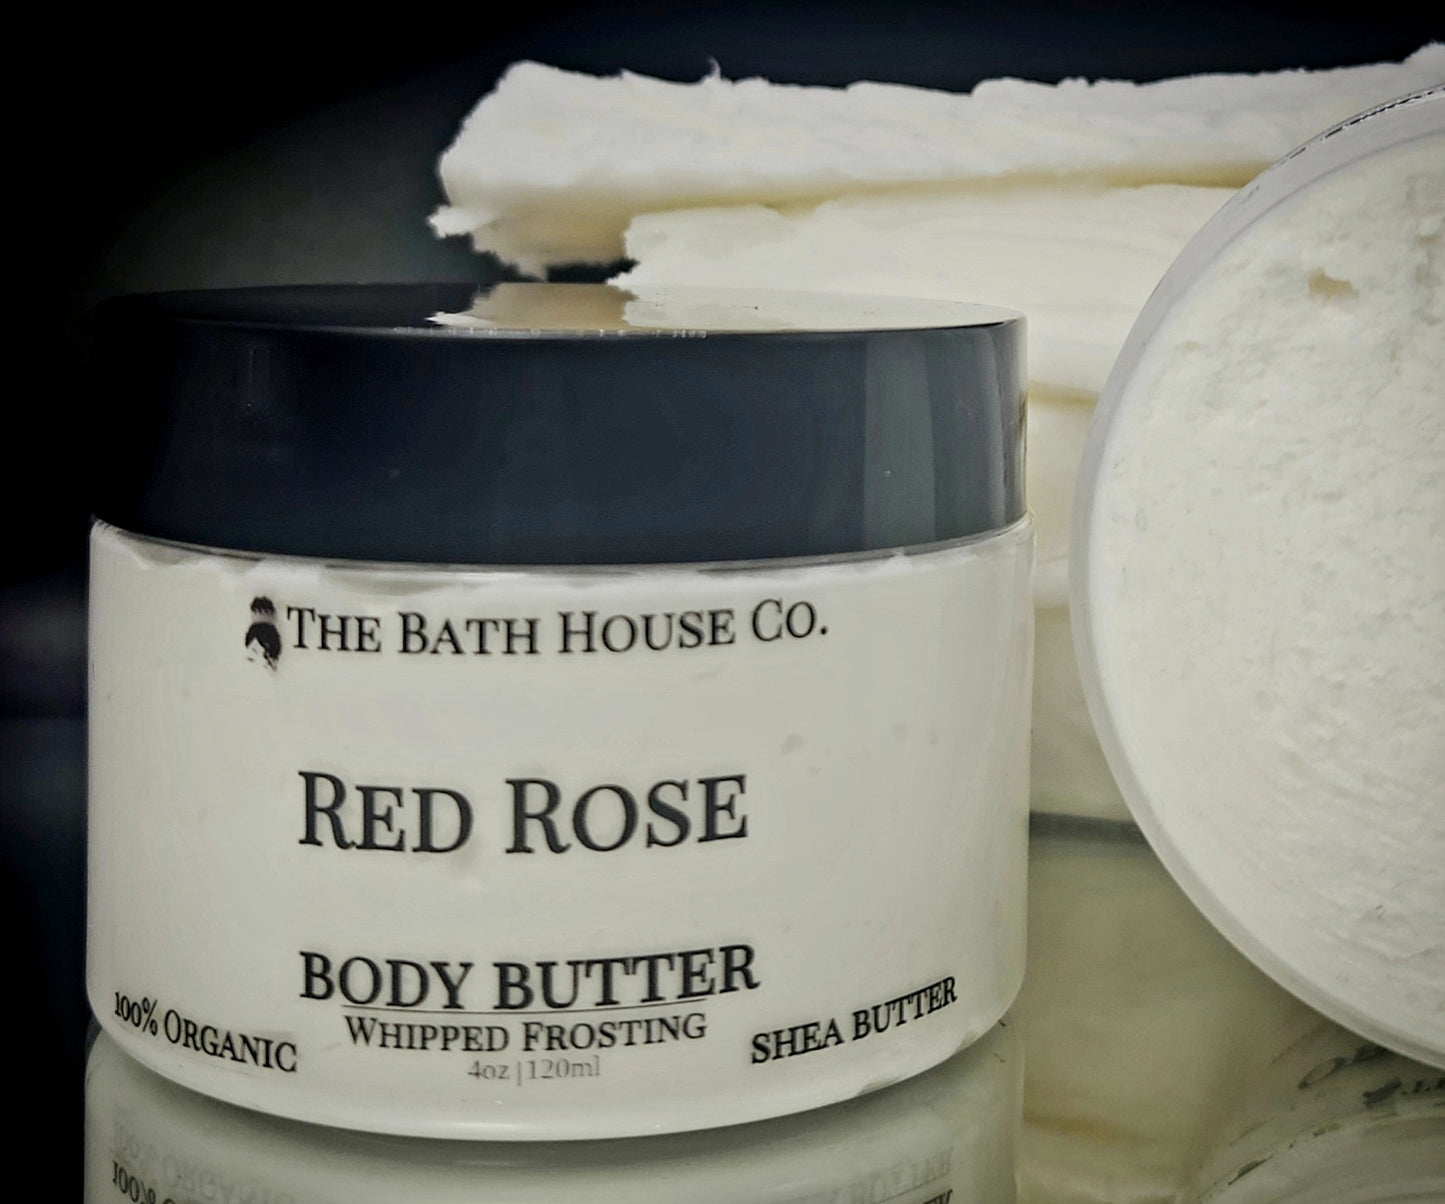 Red Rose Body Butter